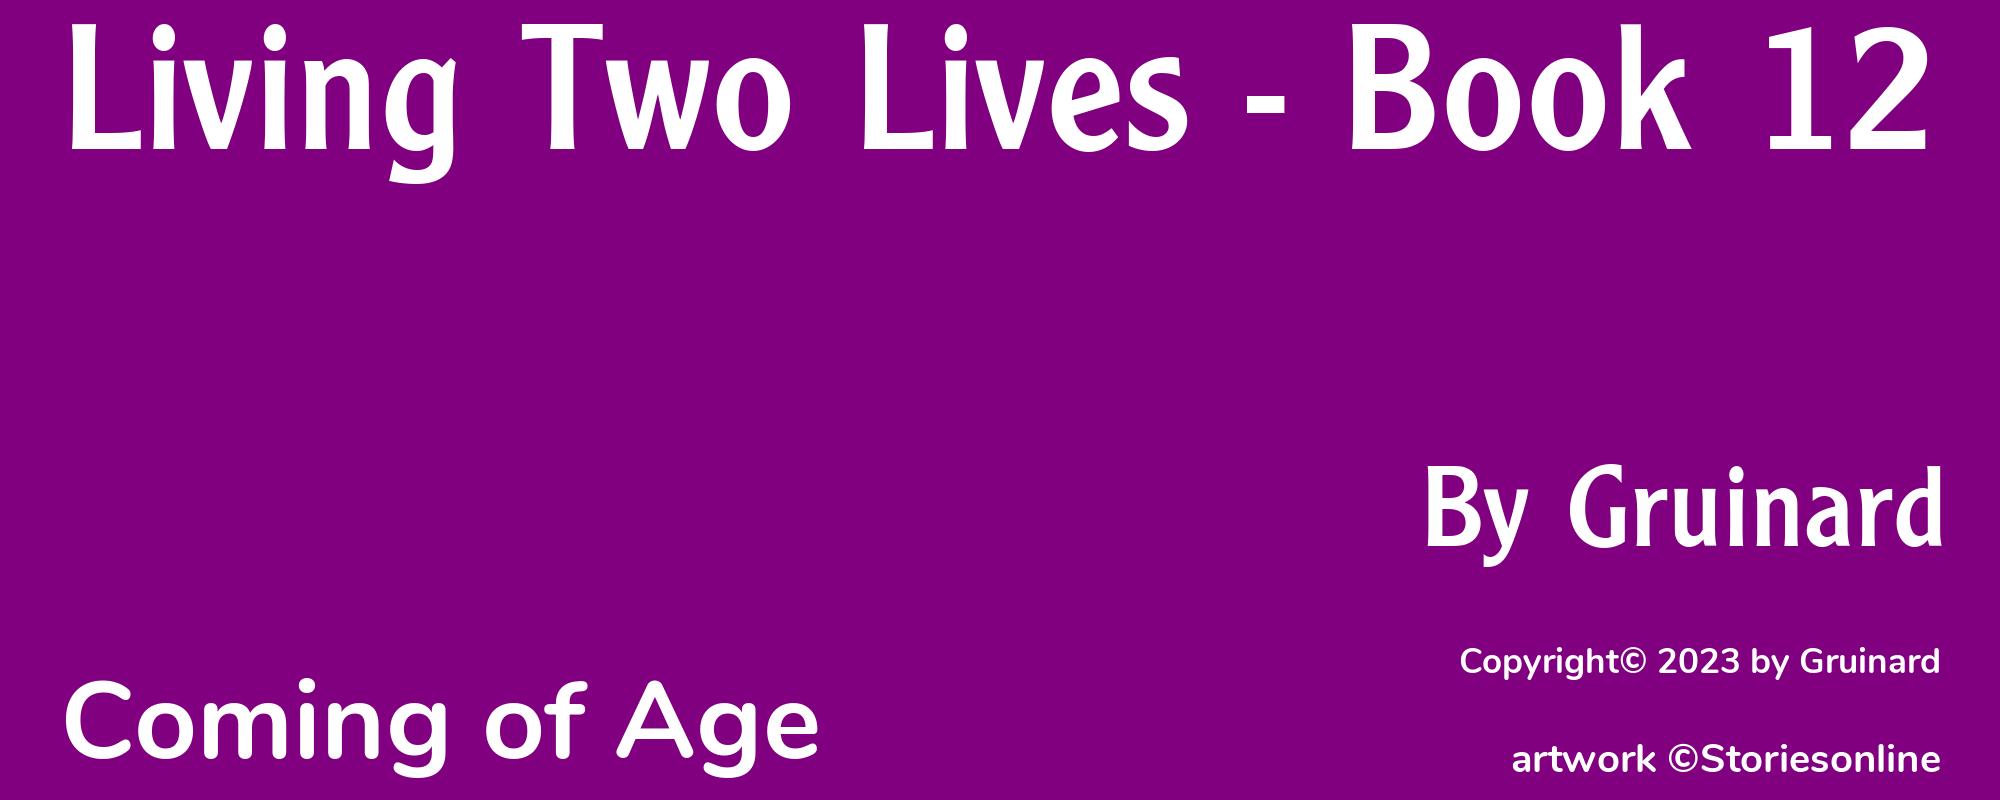 Living Two Lives - Book 12 - Cover